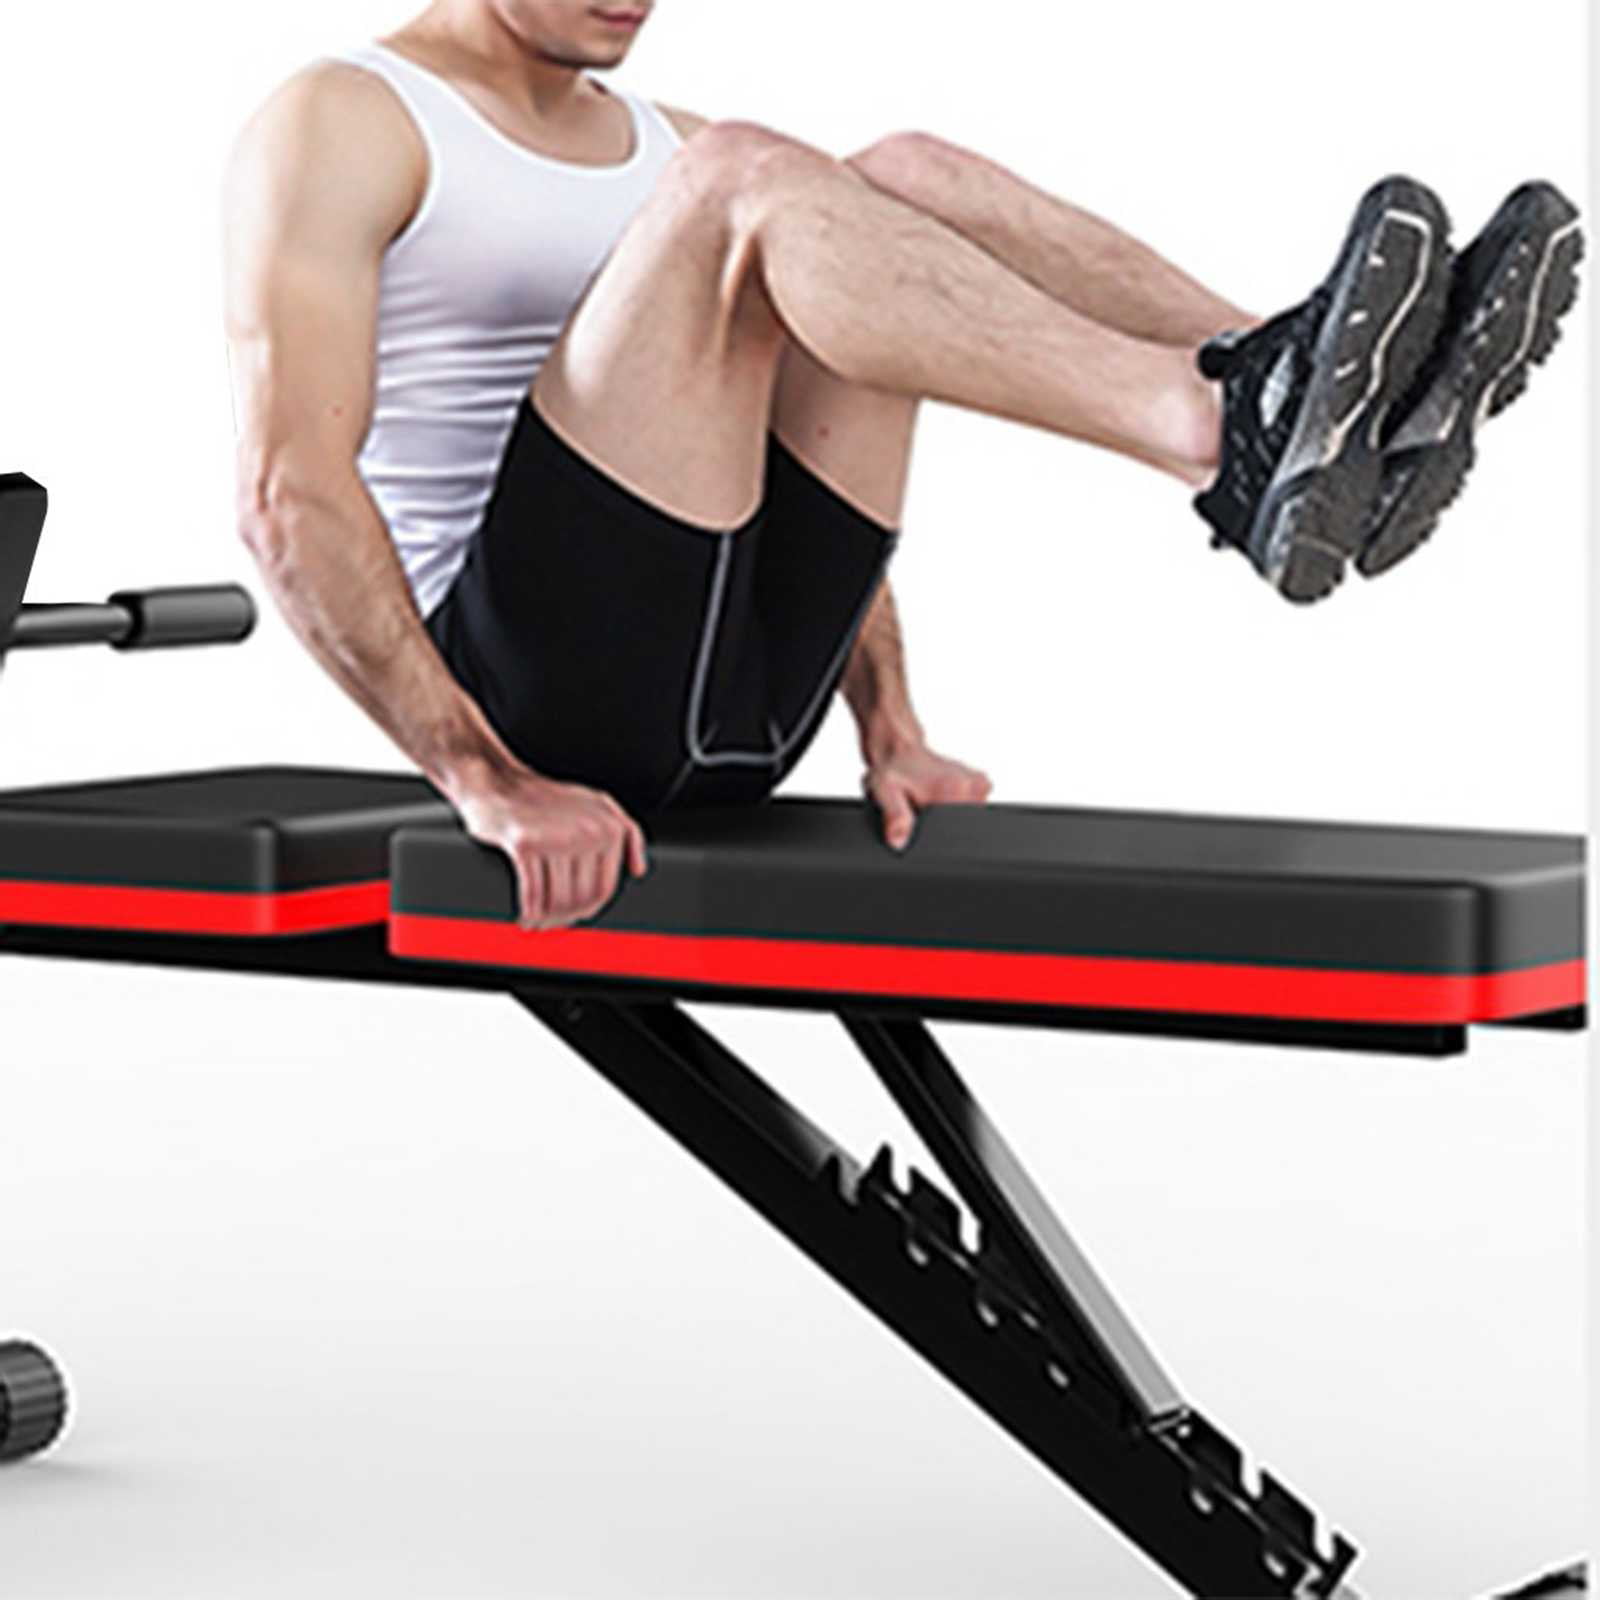 Details about   Adjustable Sit Up AB Incline Abs Bench Flat Fly Weight Press Gym Black USA Hot 